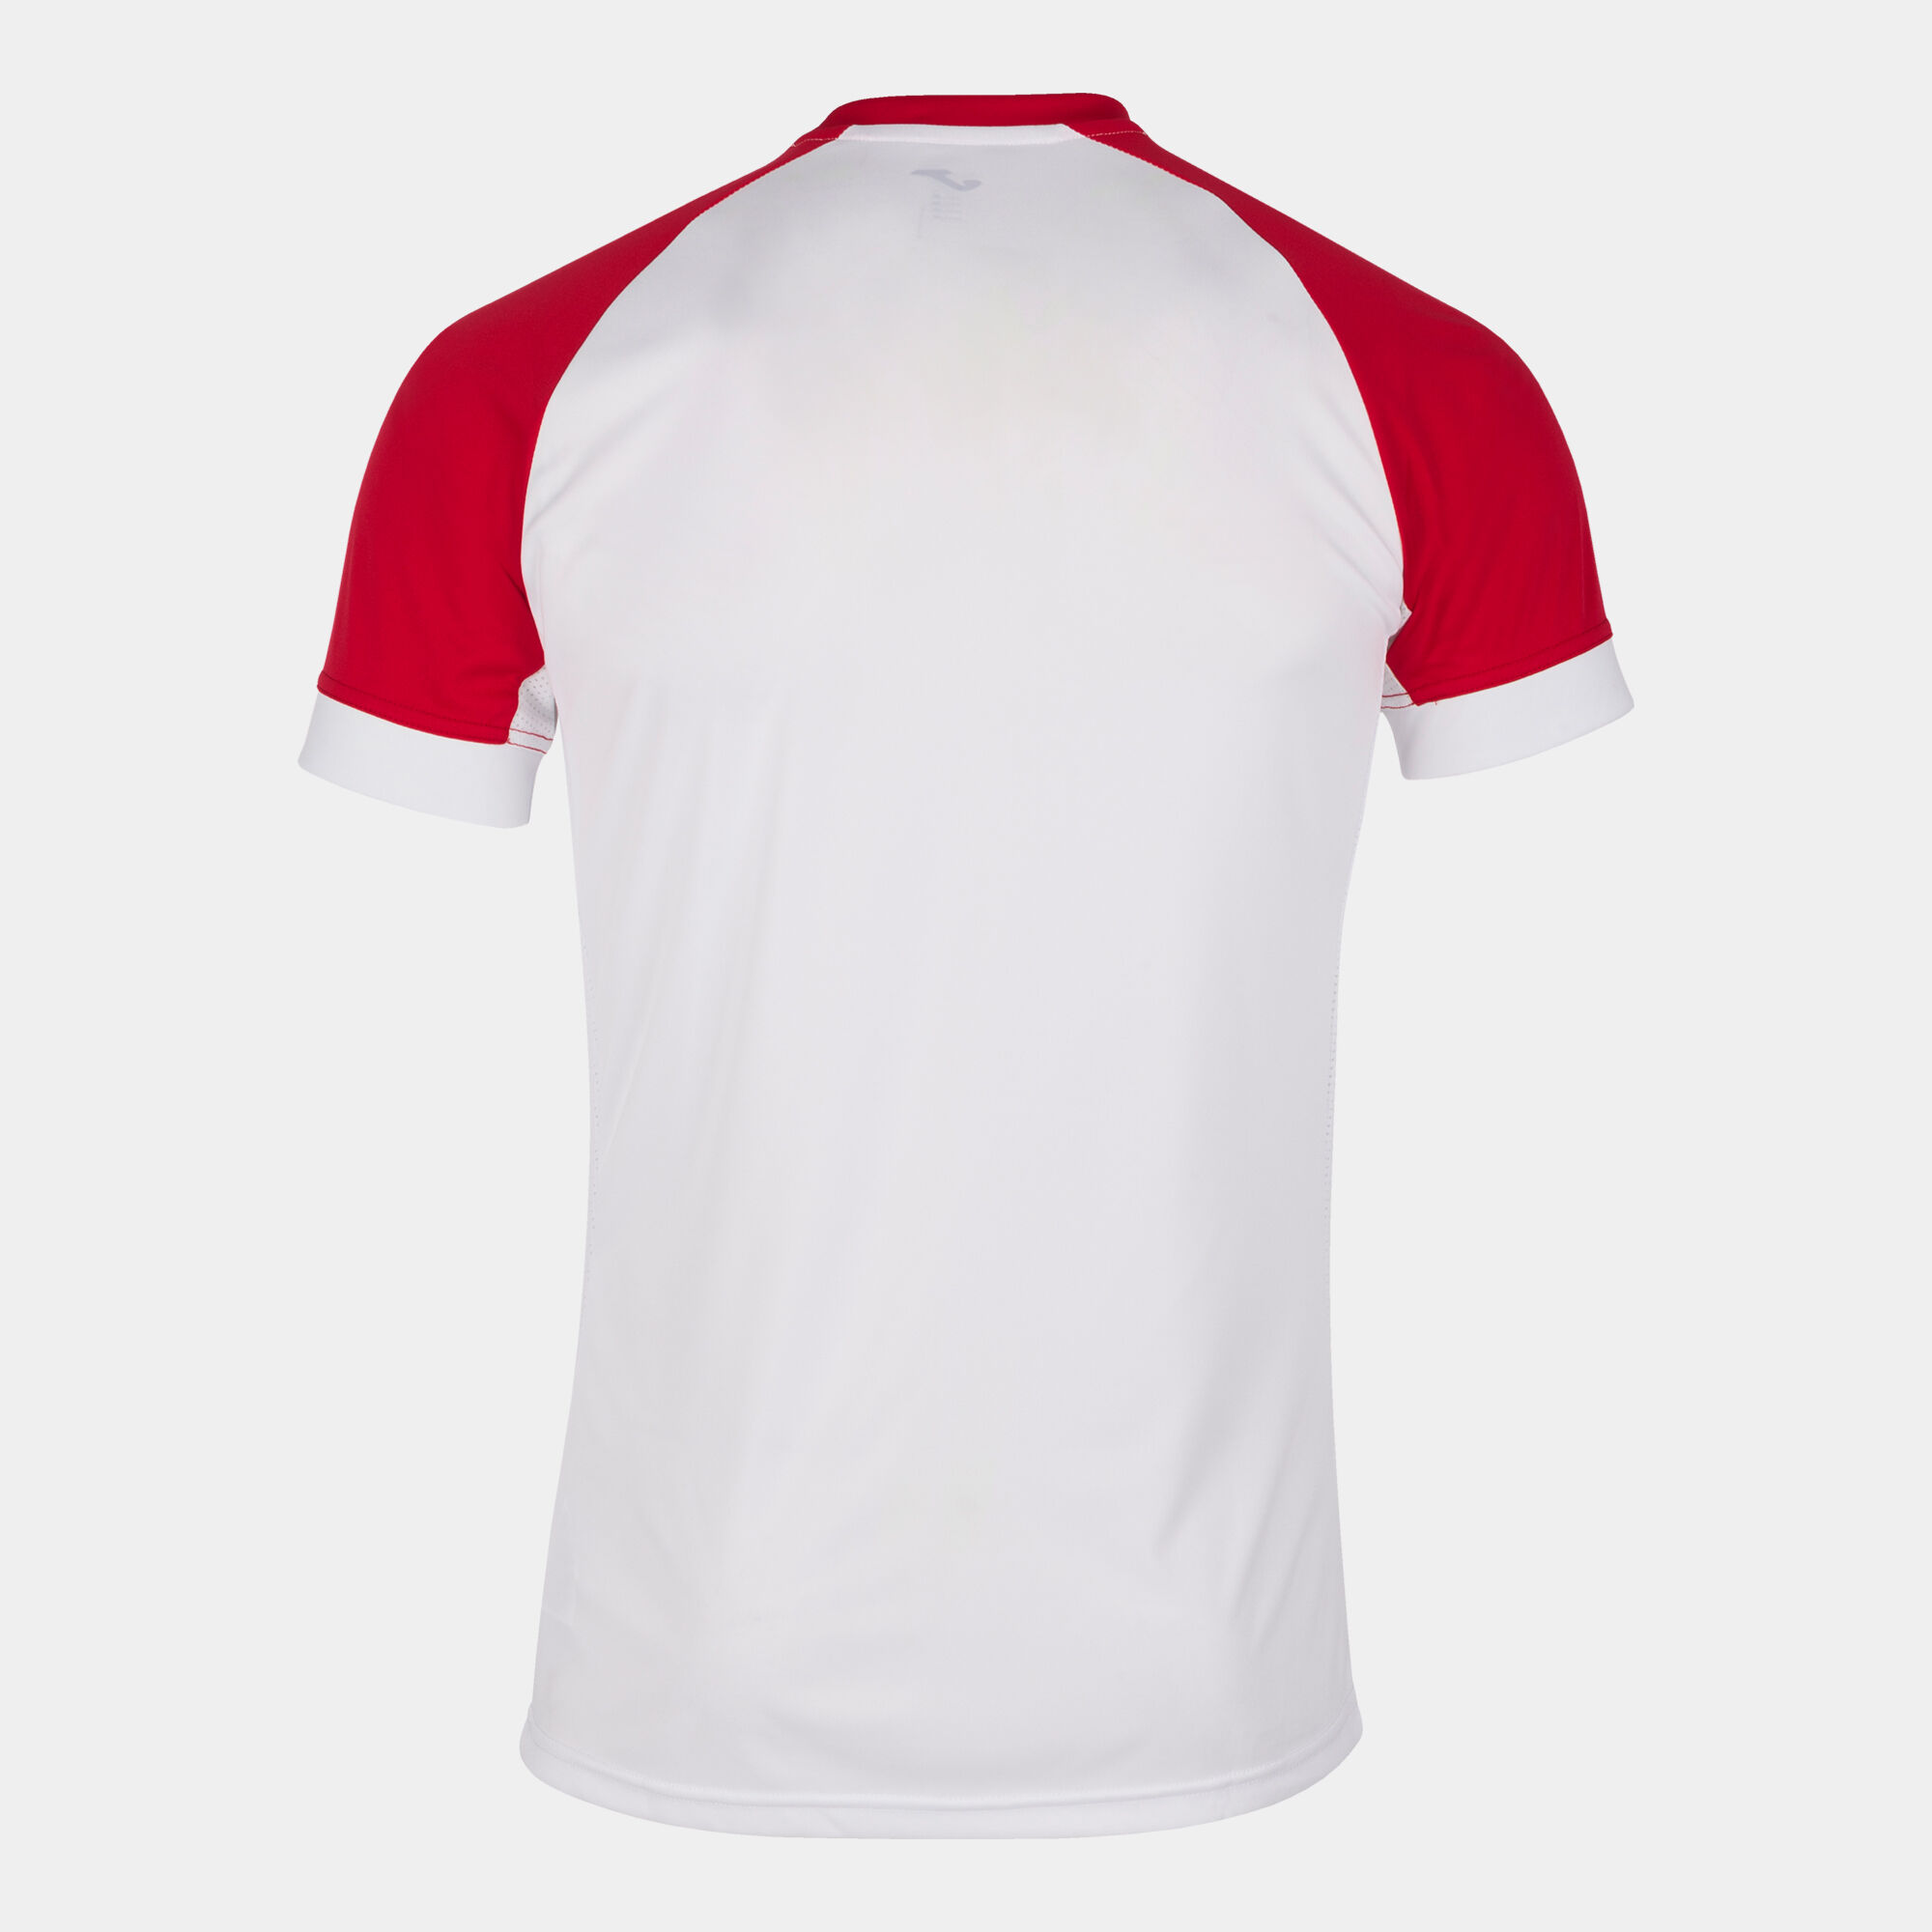 MAILLOT MANCHES COURTES HOMME SUPERNOVA II BLANC ROUGE